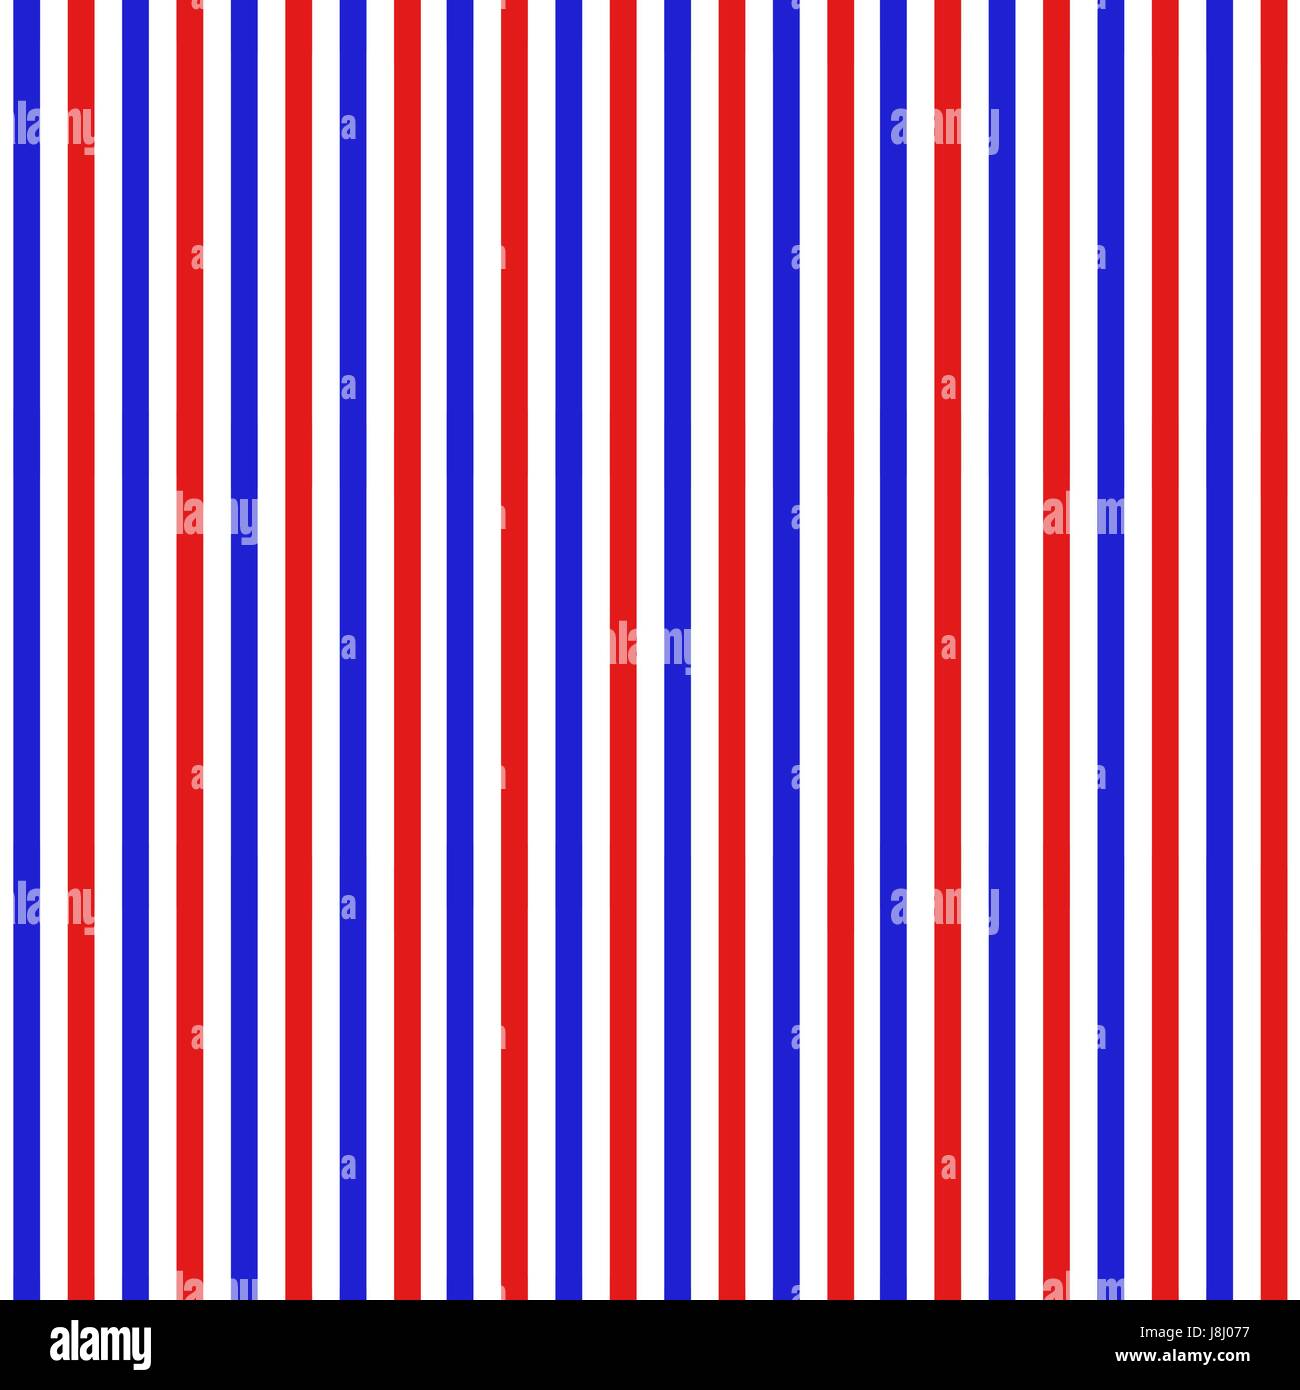 Independence Day of America seamless pattern. July 4th an endless background. USA national holiday repeating texture with stripes. Vector illustration. Stock Vector